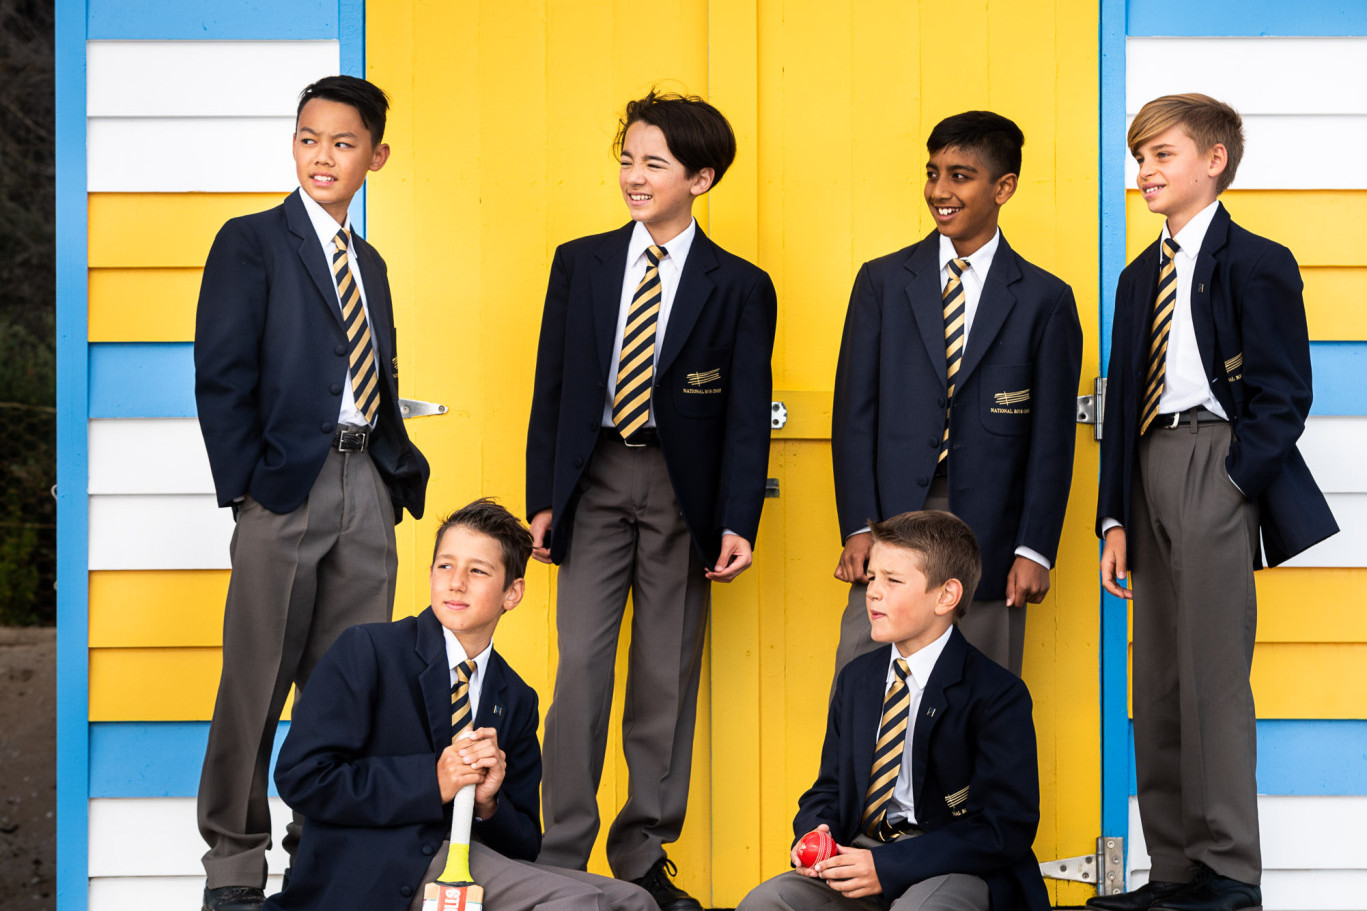 Members of the National Boys Choir of Australia (back) Aaron, Robin, Dyon, Oliver and (front) Mitchell and Christian are excited to be performing in Atherton.